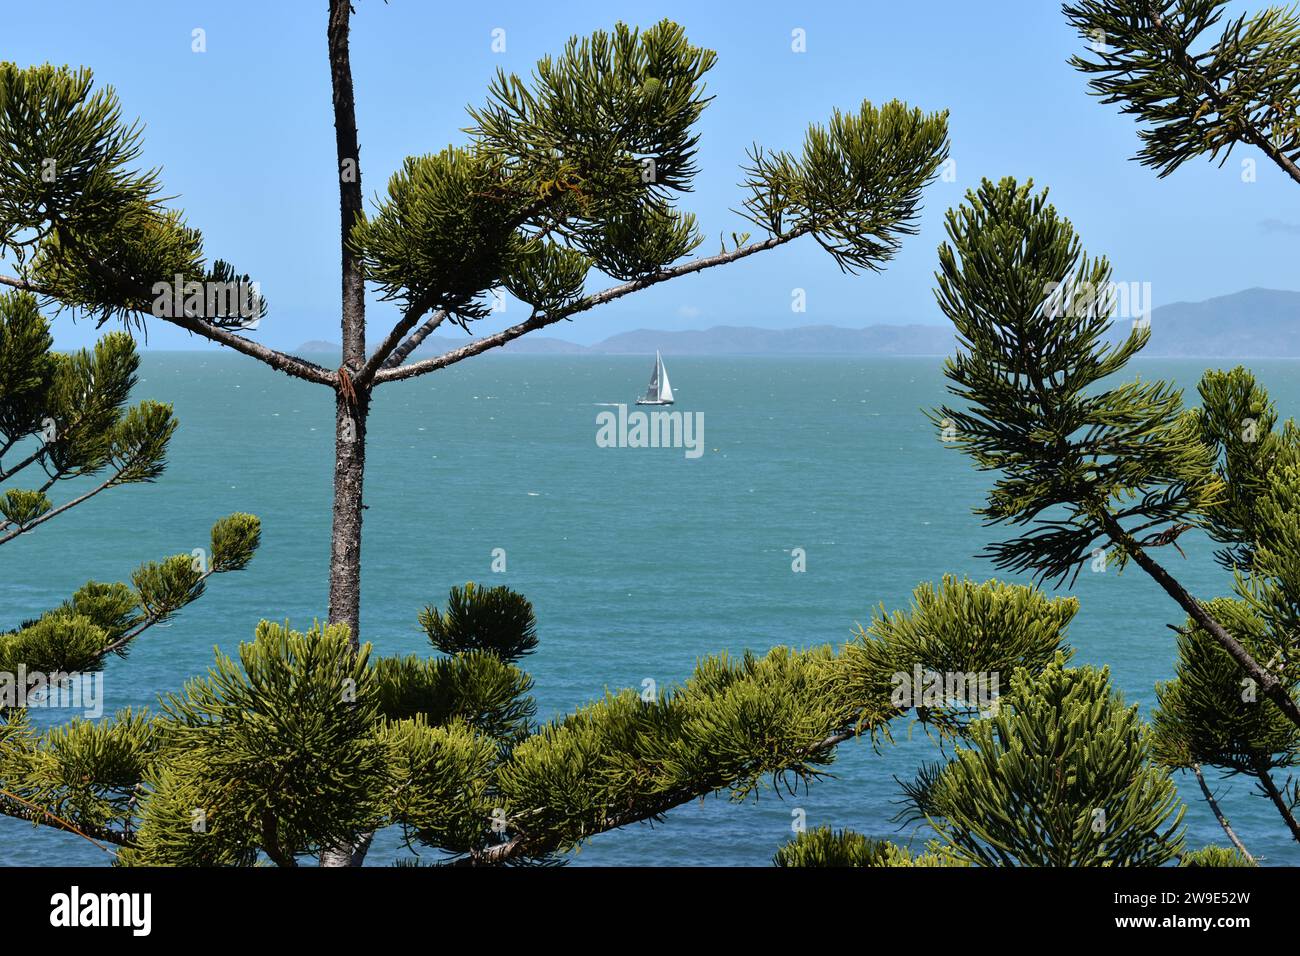 Yacht sailing off the coast of Magnetic Island, seen through branches of iconic Hoop pine, also know as araucaria cunninghamii or Dorrigo pine Stock Photo